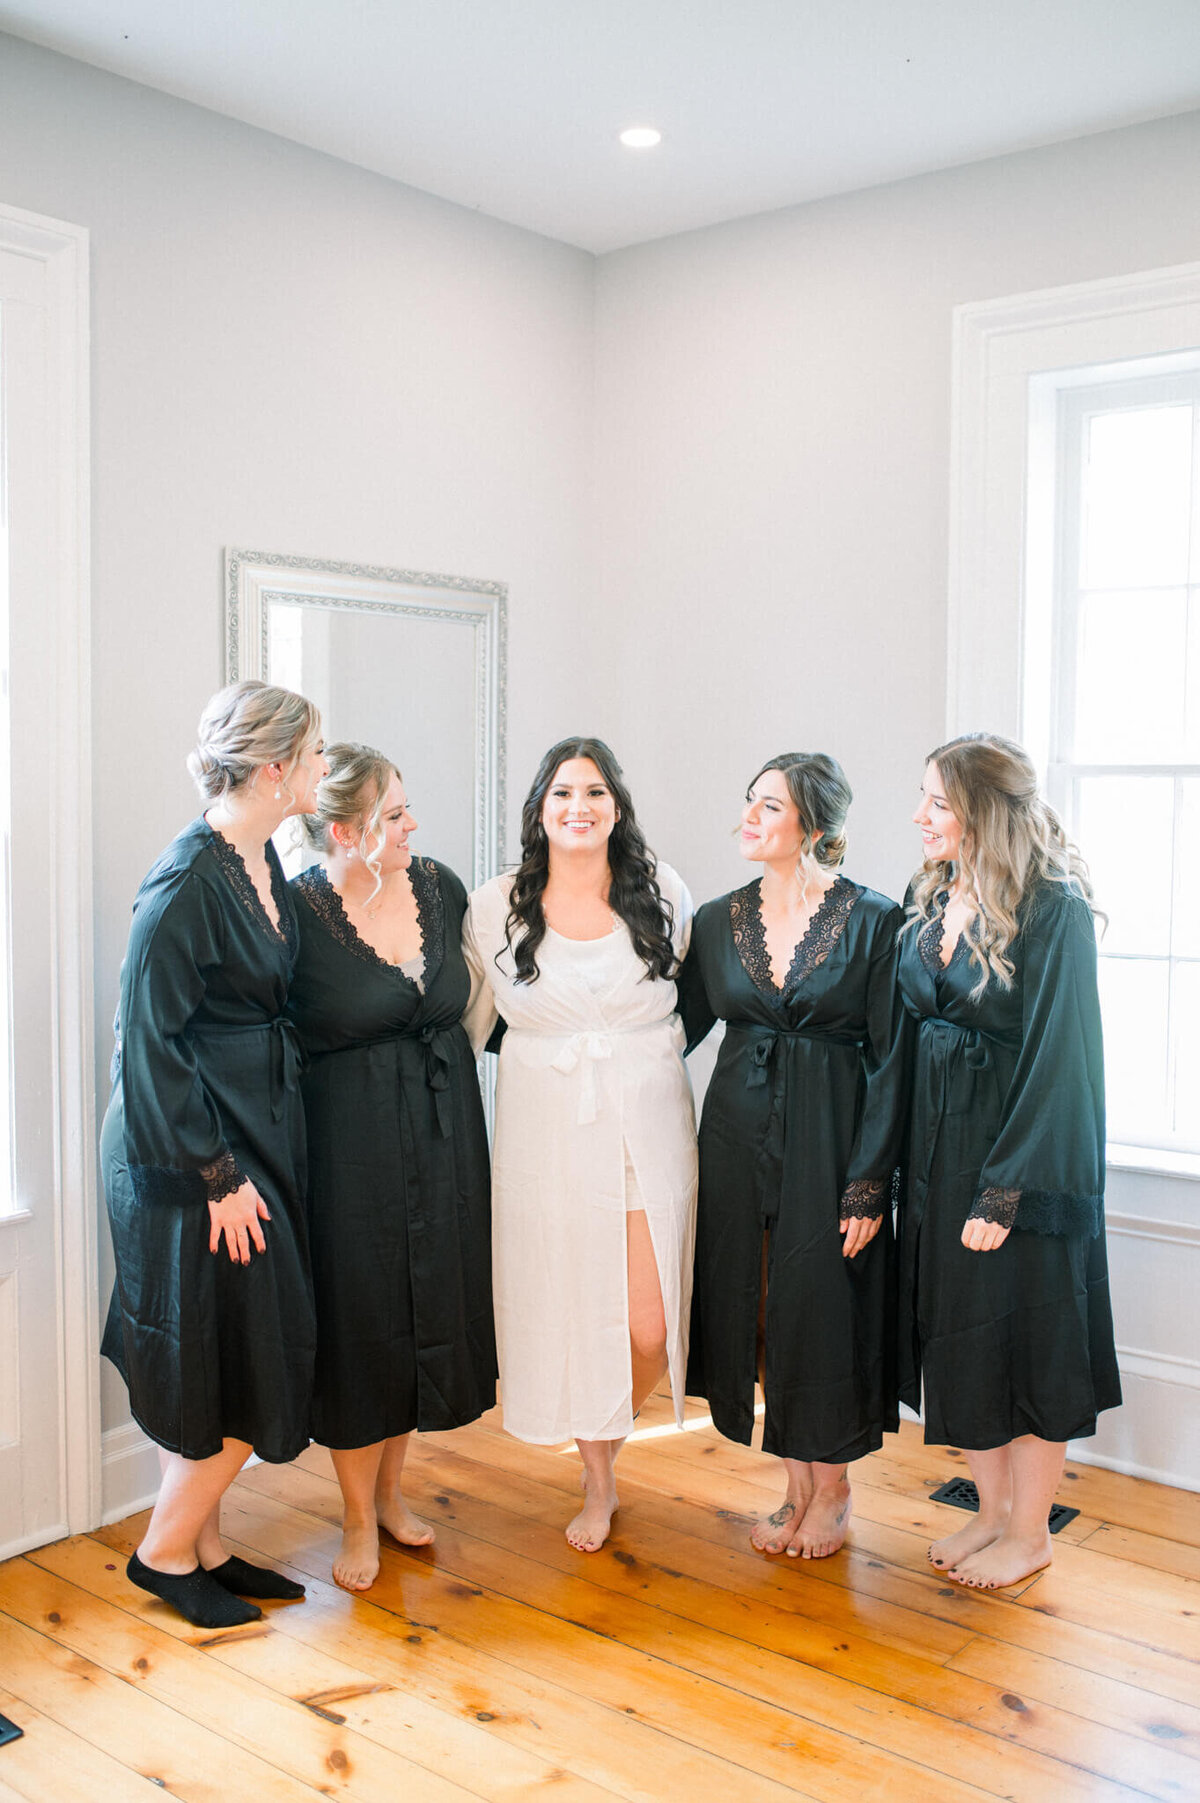 Bride wearing white robe in the center of her bridesmaids wearing black robes